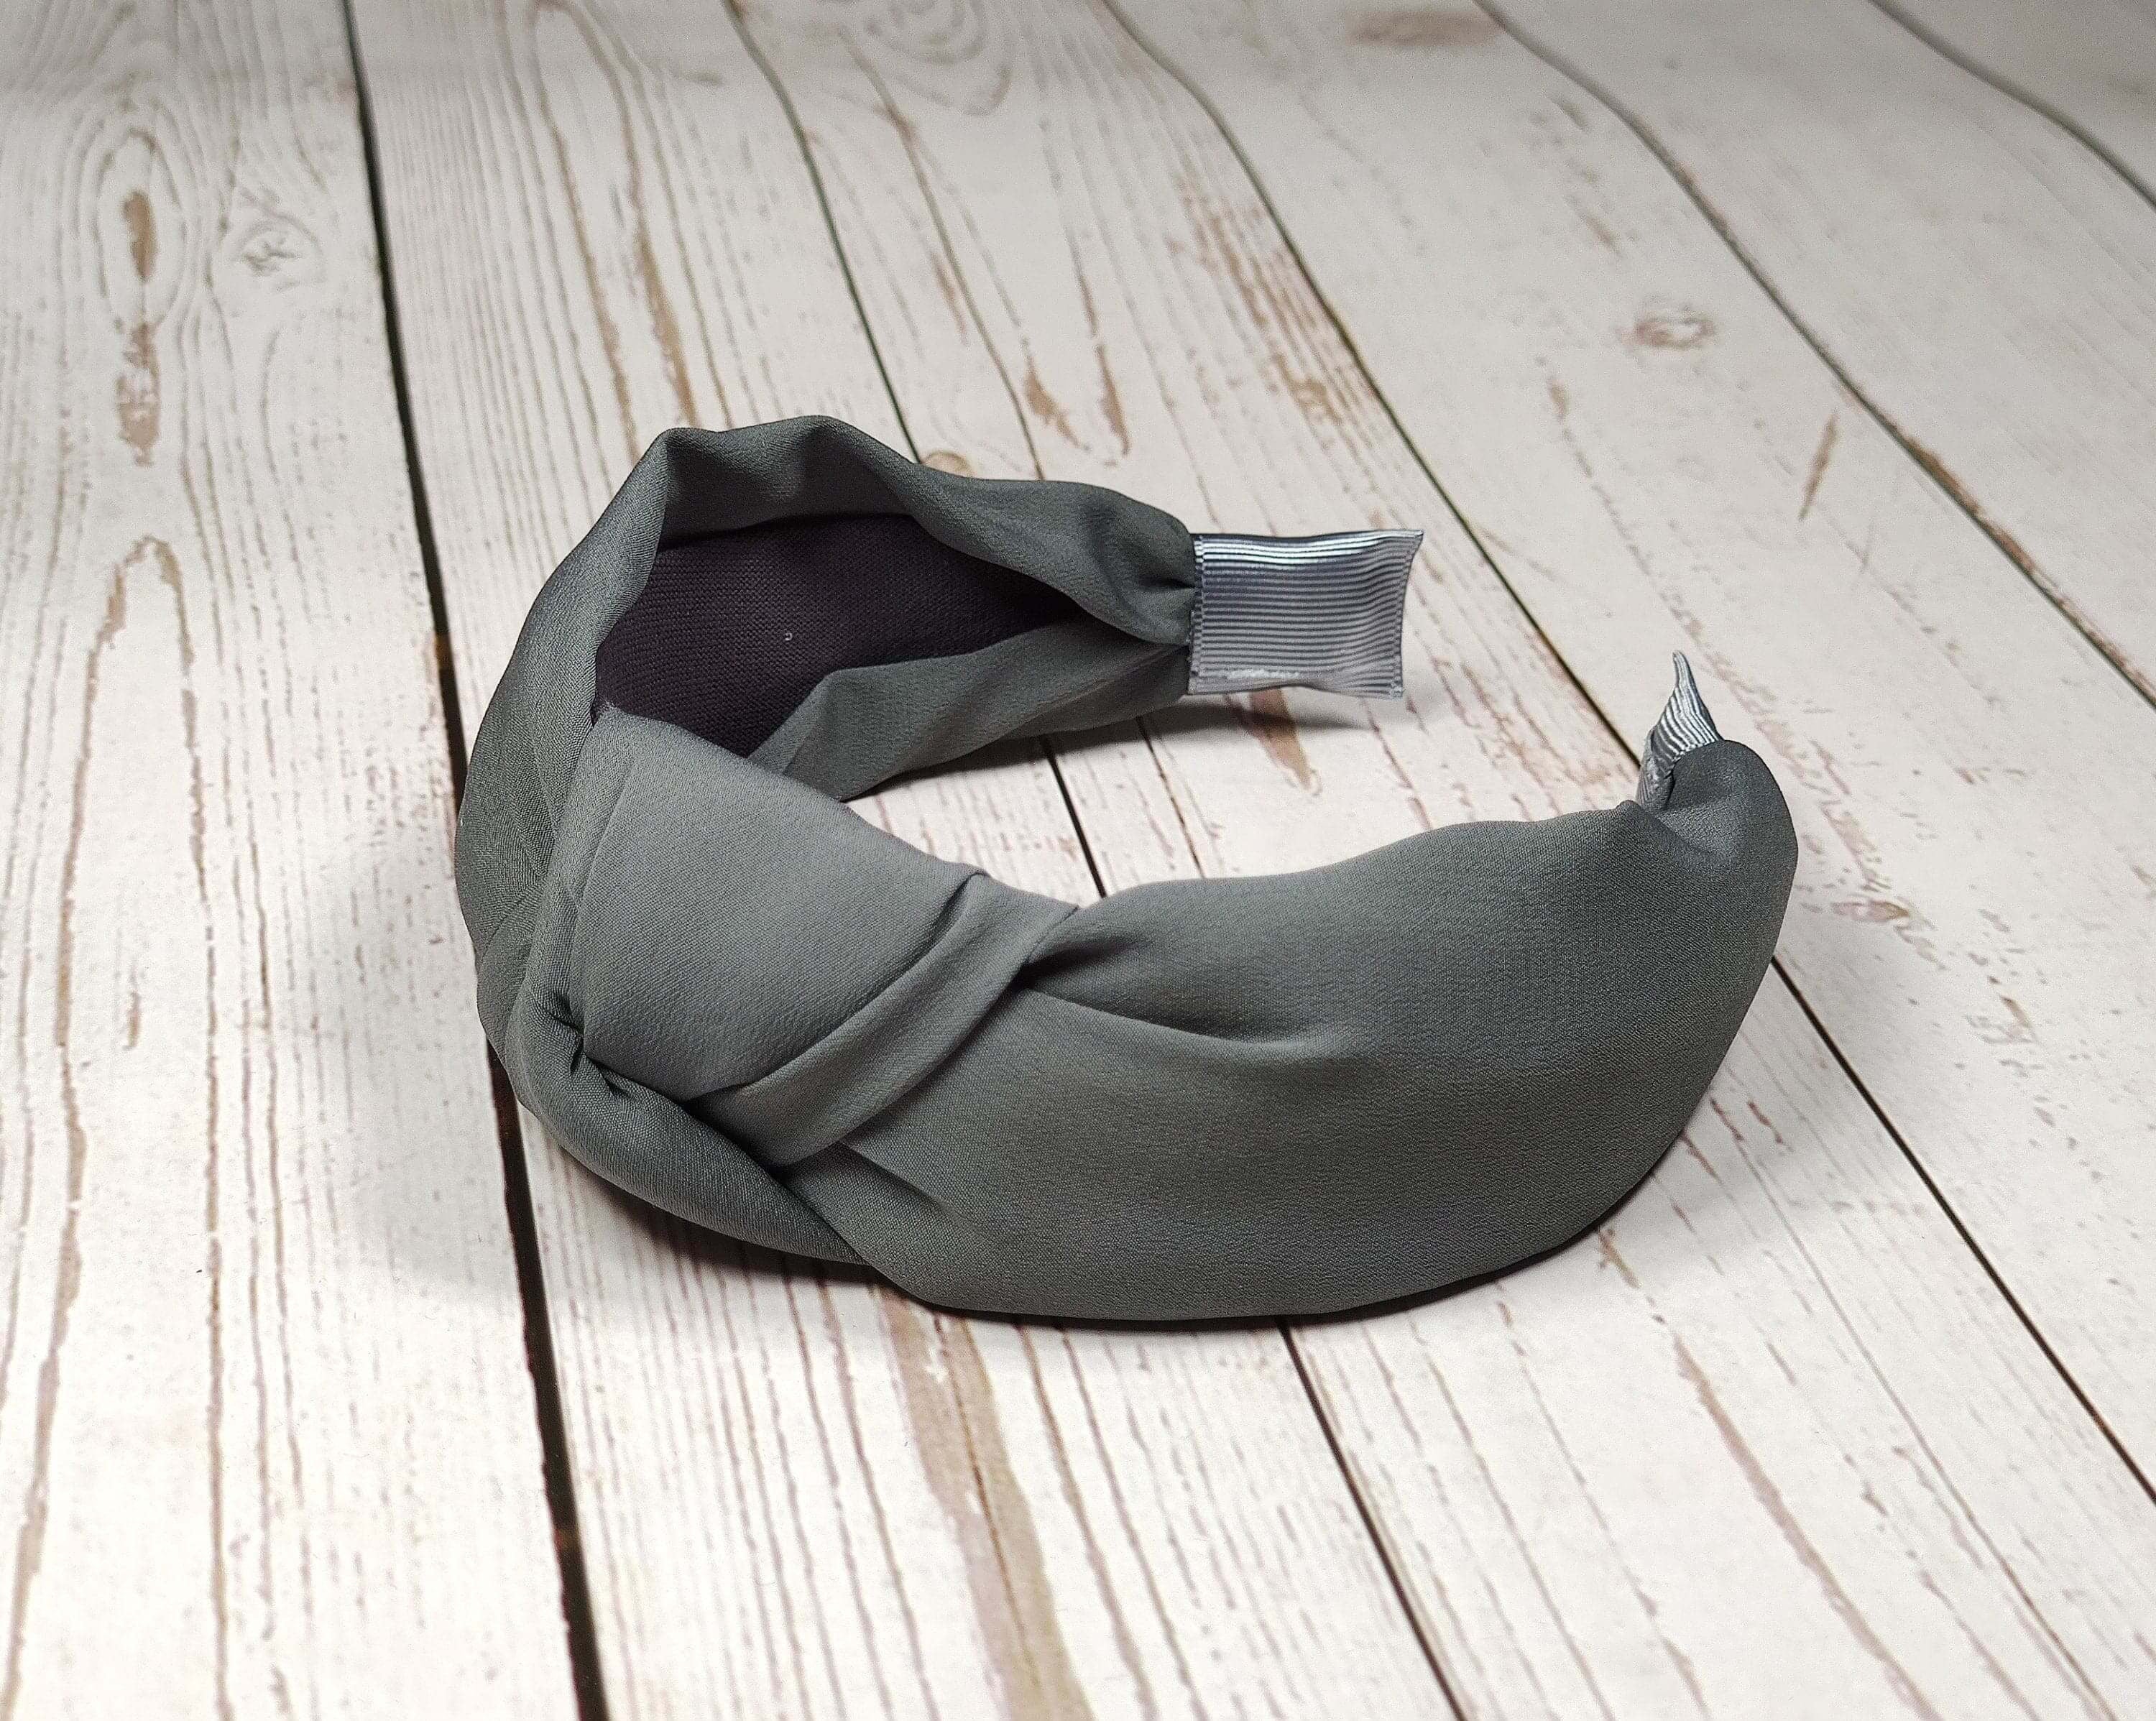 If you&#39;re looking for a fashionable hairband that you can wear both day and evening, then check out these grey twist knot headbands! They come in many different colors and are made from soft and comfy viscose crepe material.